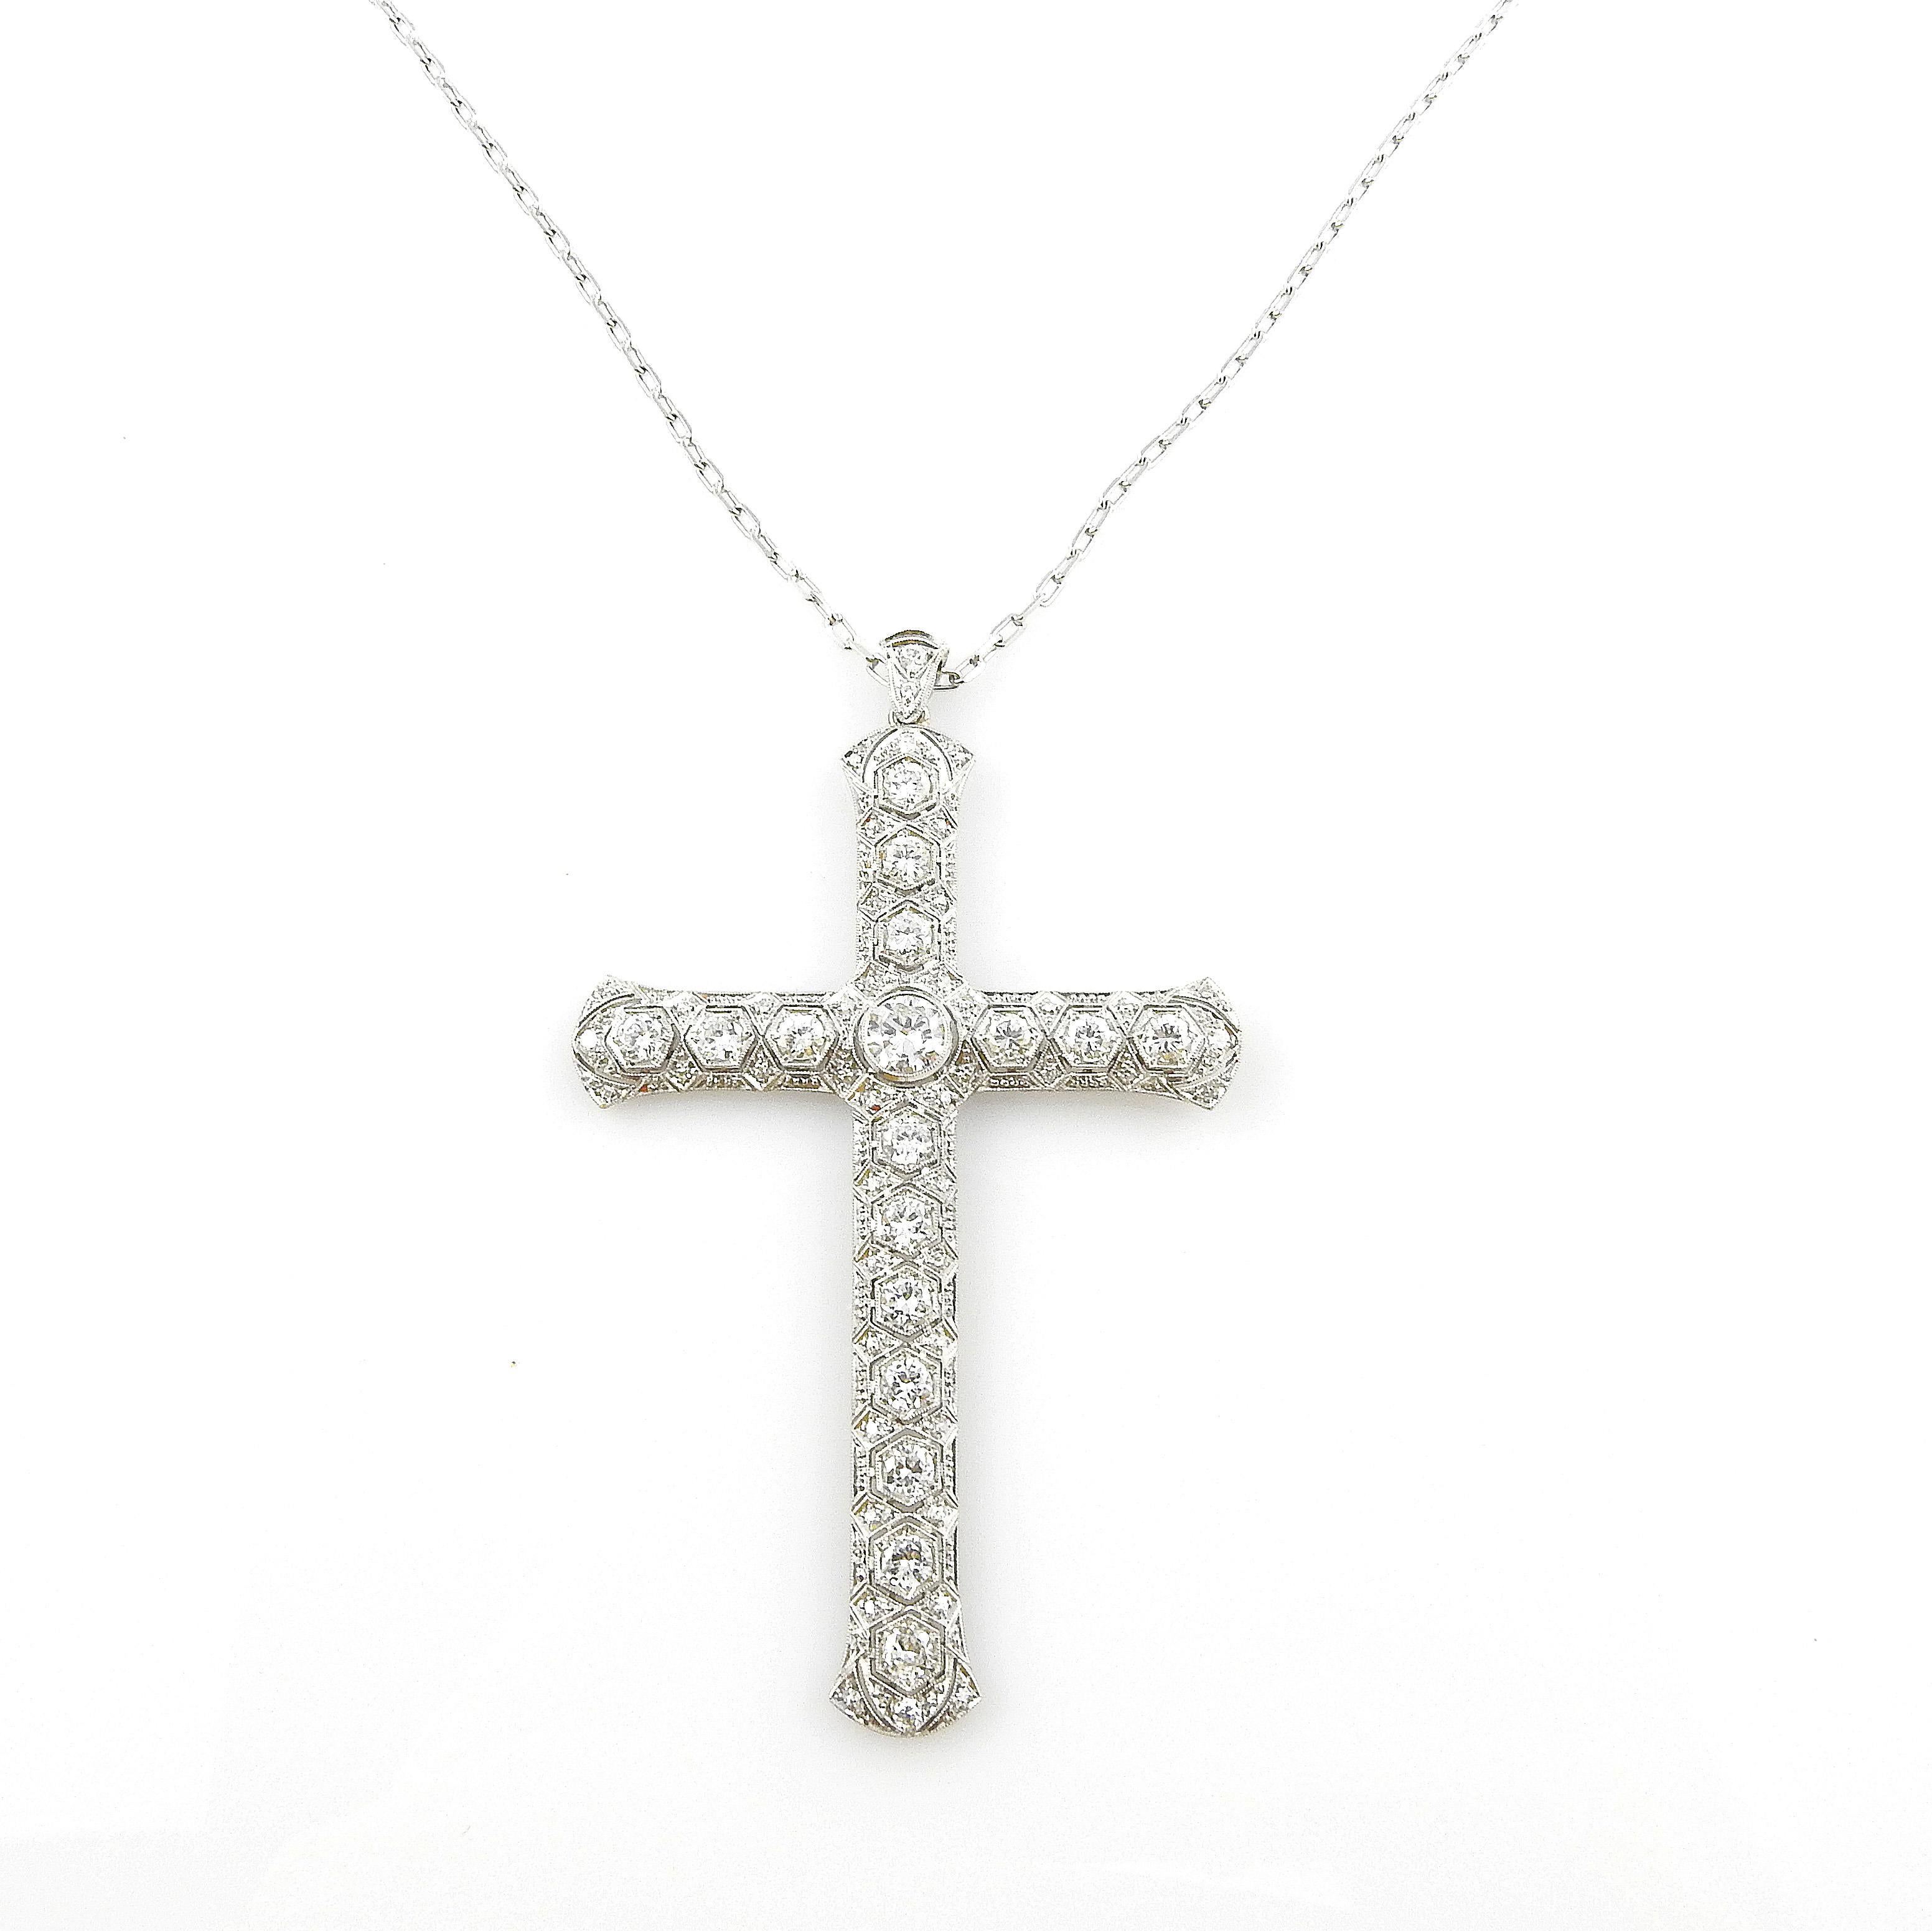 14K White Gold Large Diamond Cross Pendant Necklace 3.51cts #14328 For Sale 4